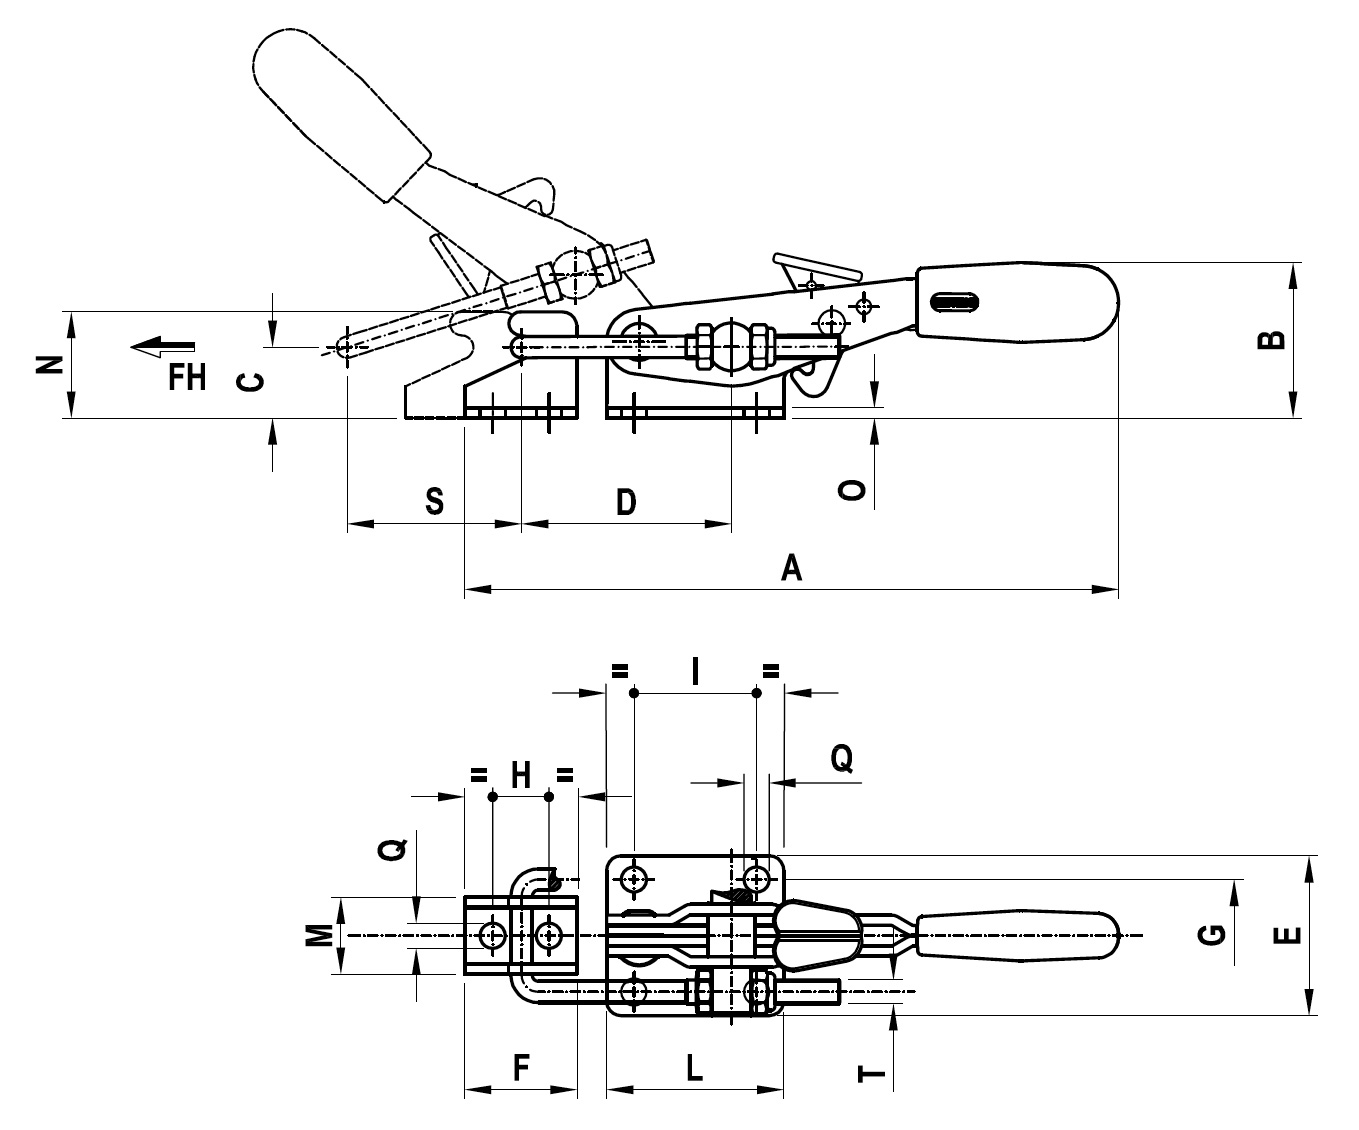 Click to enlarge image 1Latch_T6 with safety lock tech.jpg